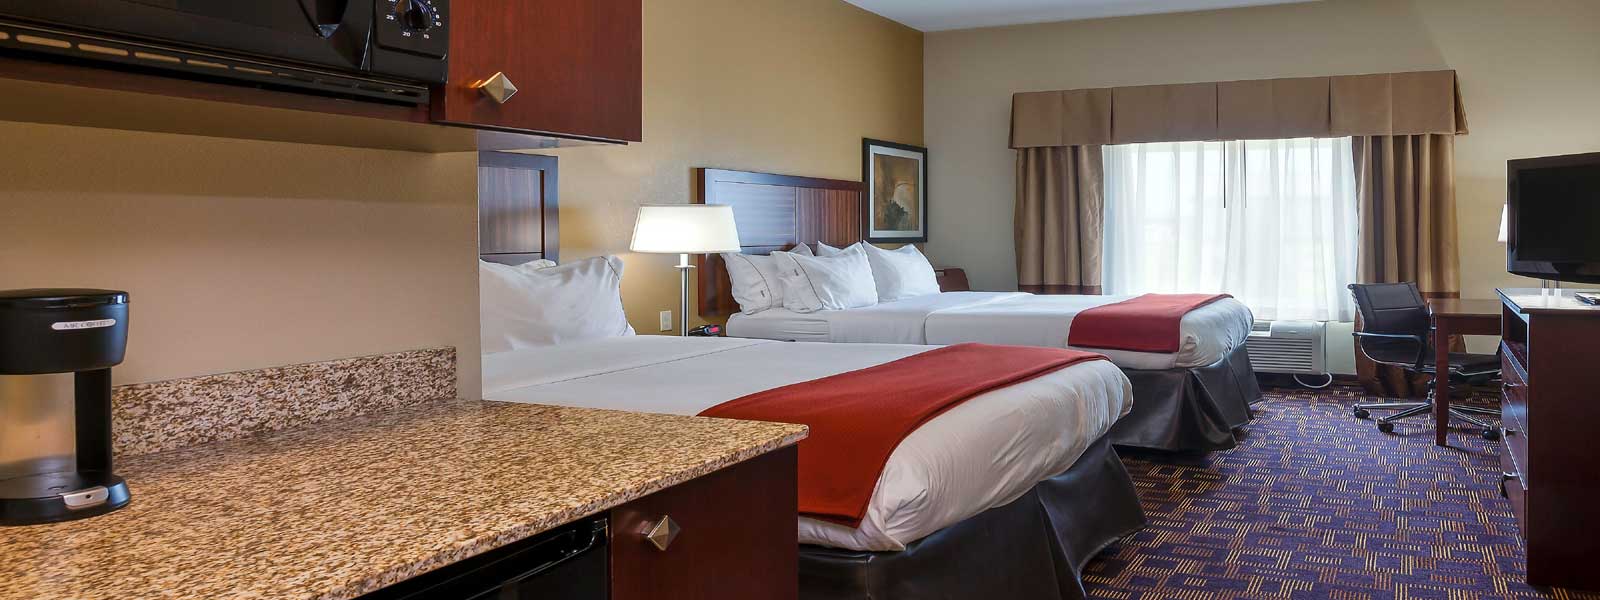 Motels in Salina Budget Discount 3 Star Rating 